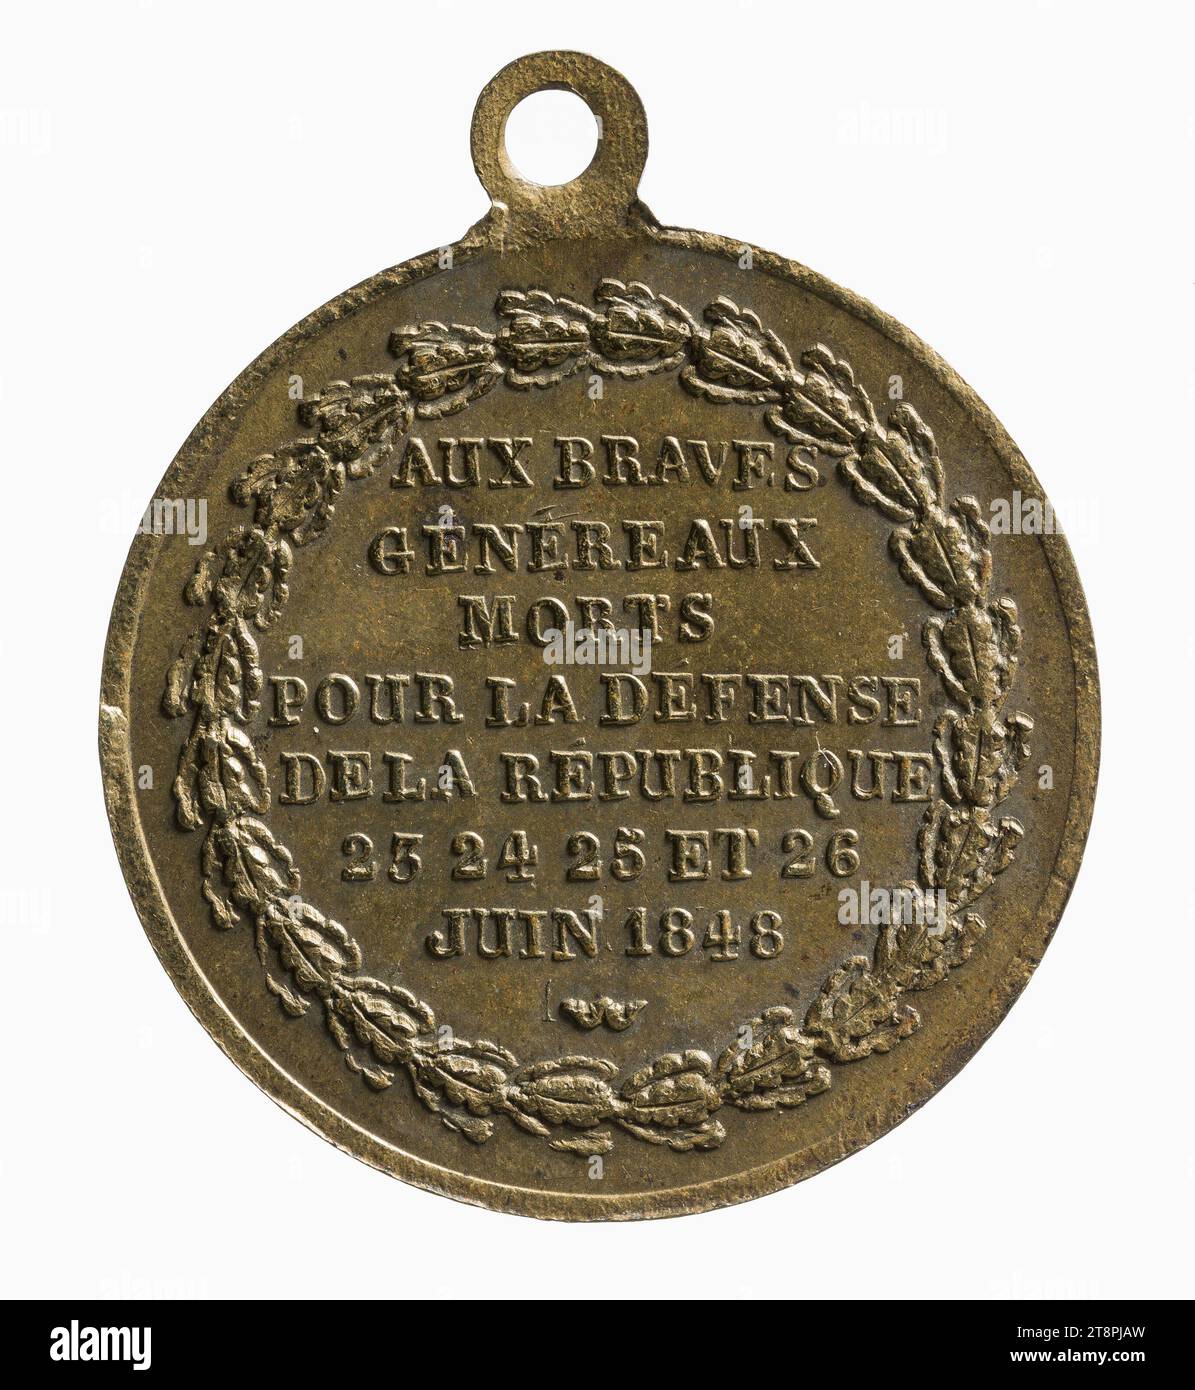 Tribute to the generals killed during the Days of June, 23-24-25-26 June 1848, Array, Numismatic, Medal, Copper, Silver plated = silver plating, Dimensions - Work: Diameter: 2.2 cm, Weight (type size): 4.2 g Stock Photo